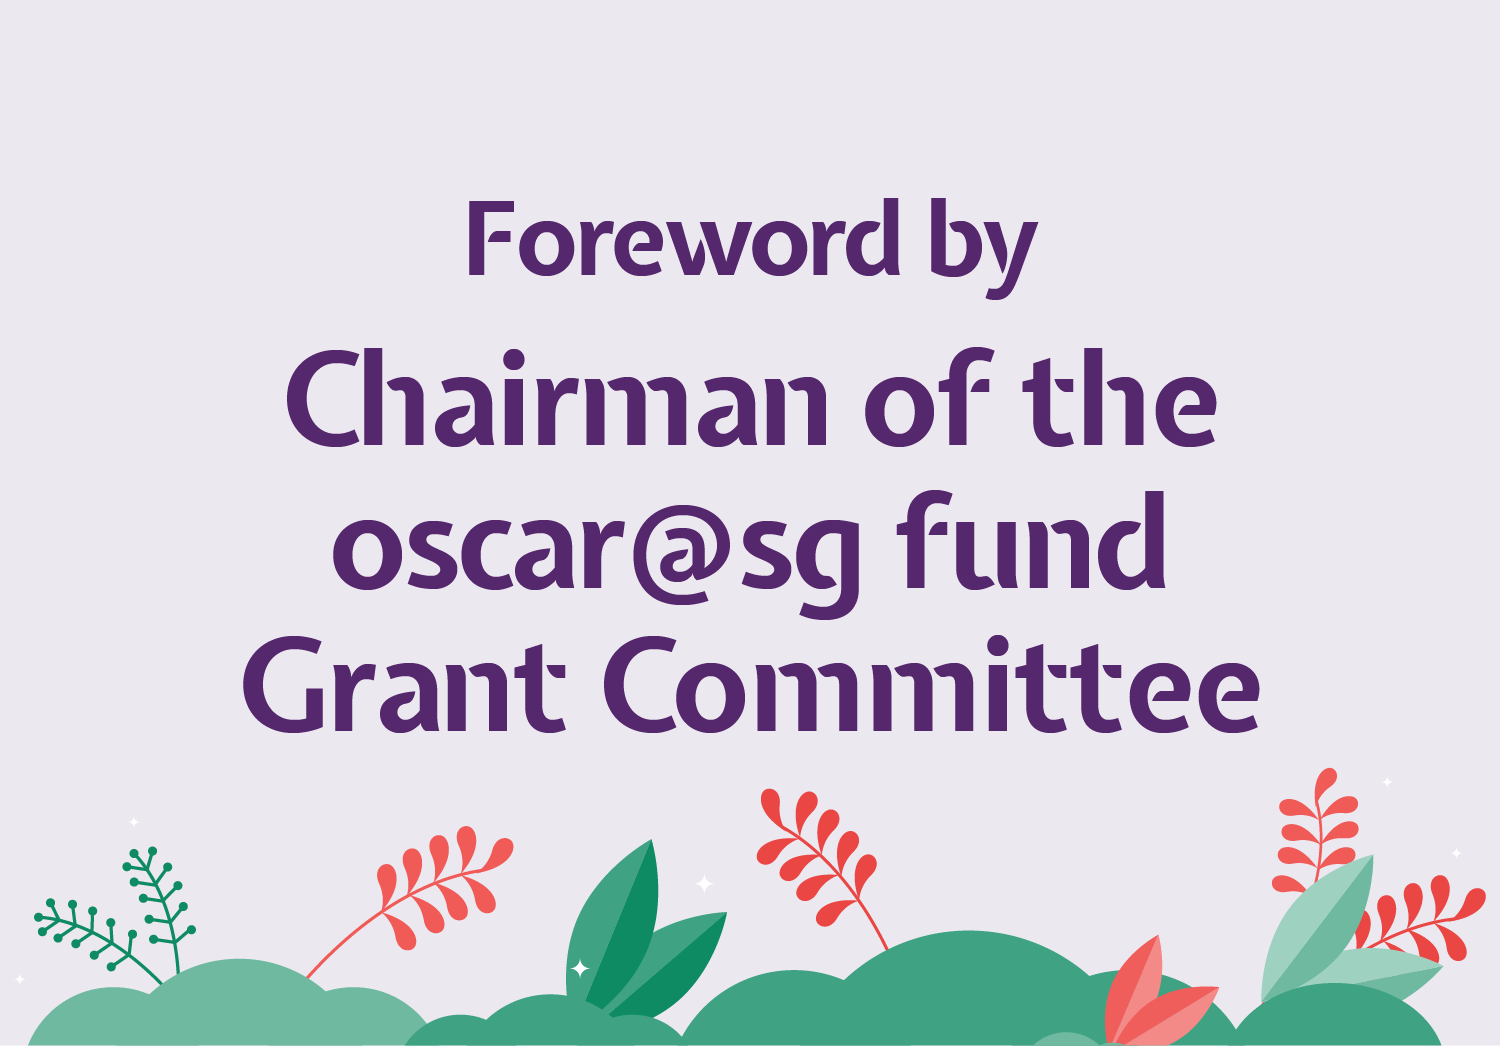 Foreword by Chairman of the oscar@sg fund Grant Committee